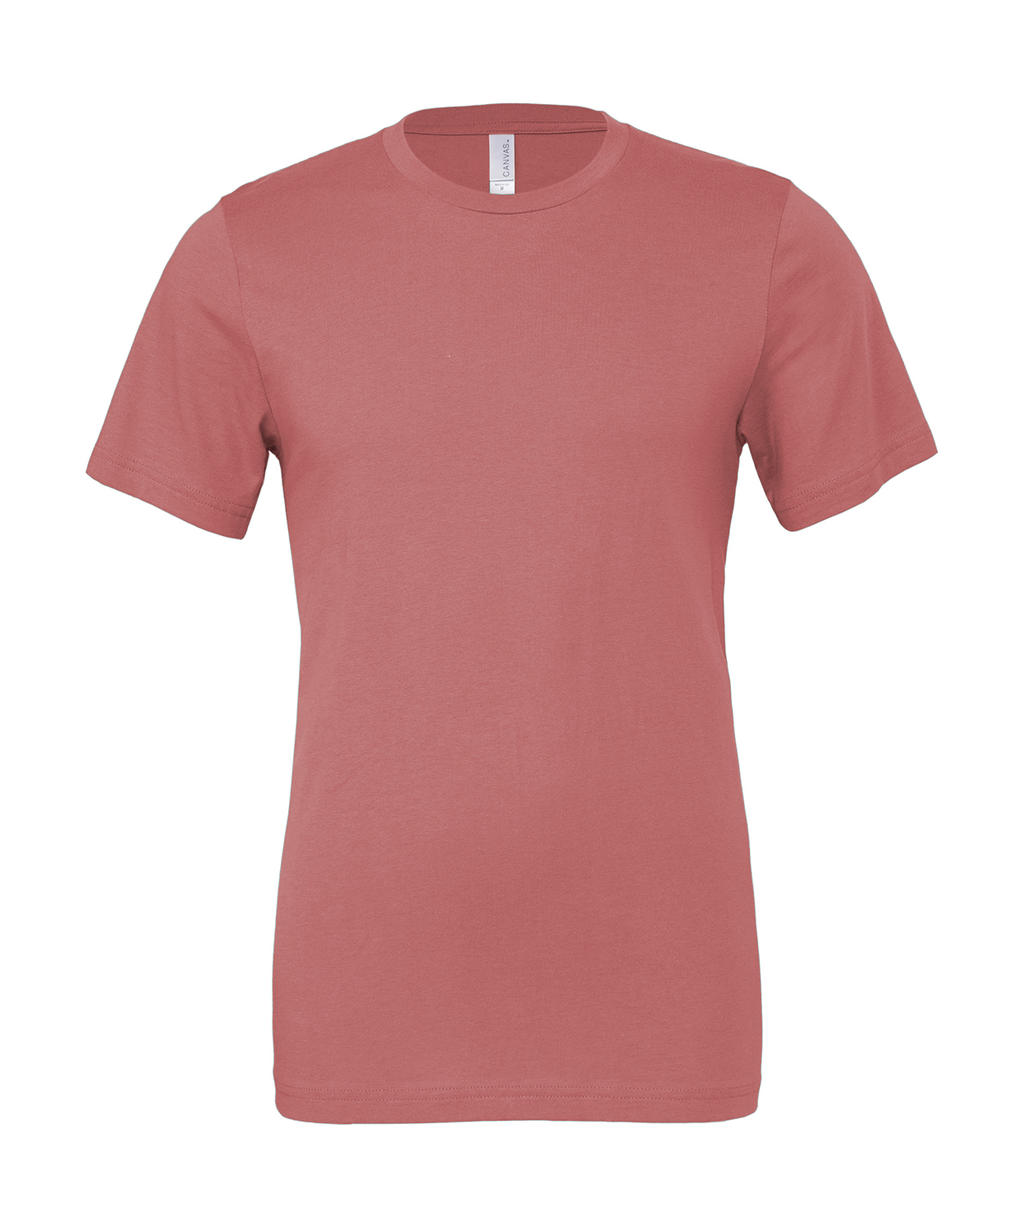  Unisex Jersey Short Sleeve Tee in Farbe Mauve